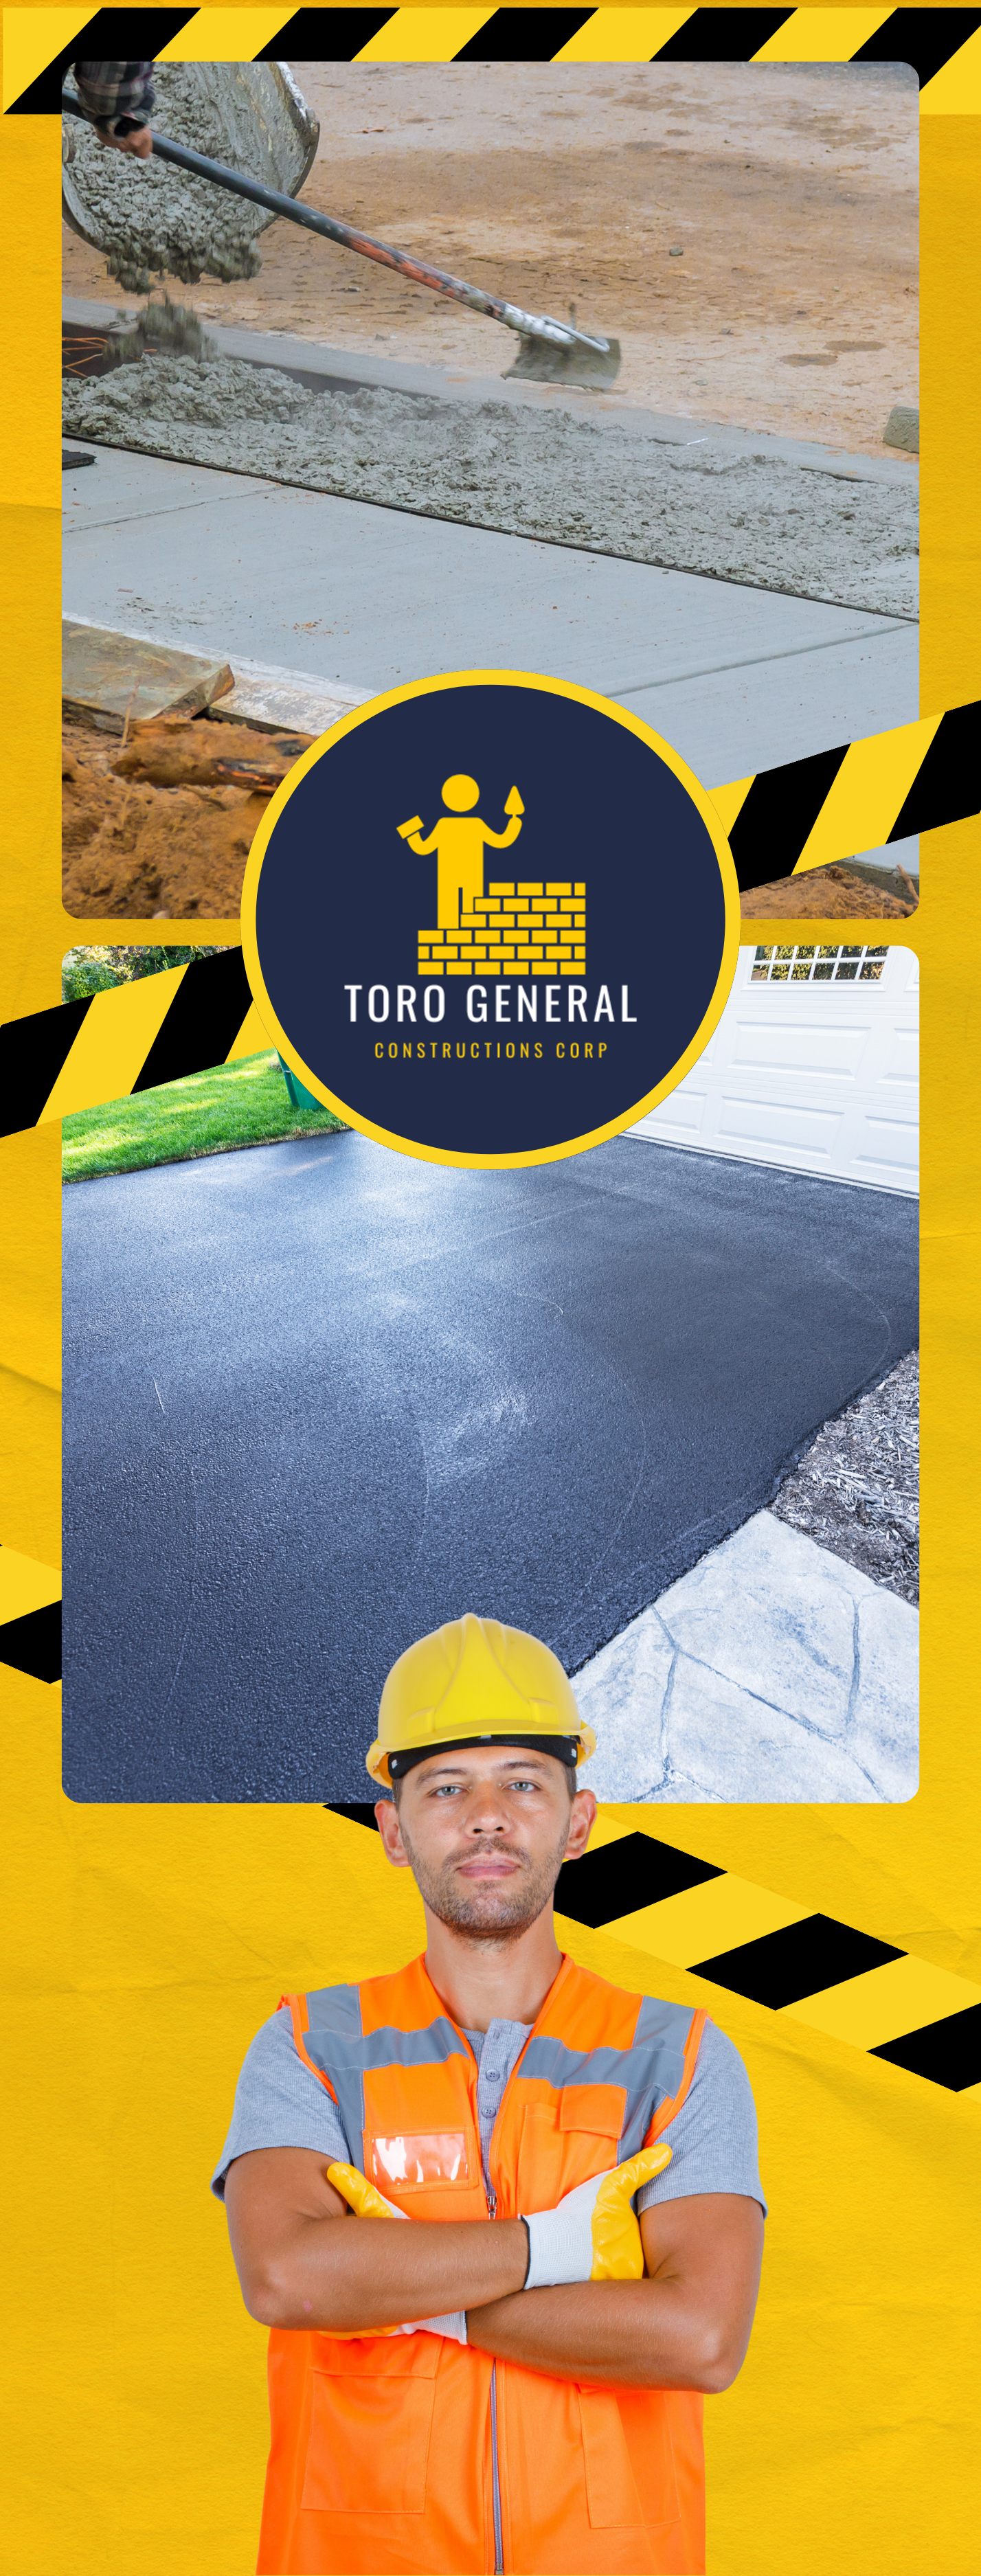 ABOUT SERVICES - TORO GENERAL